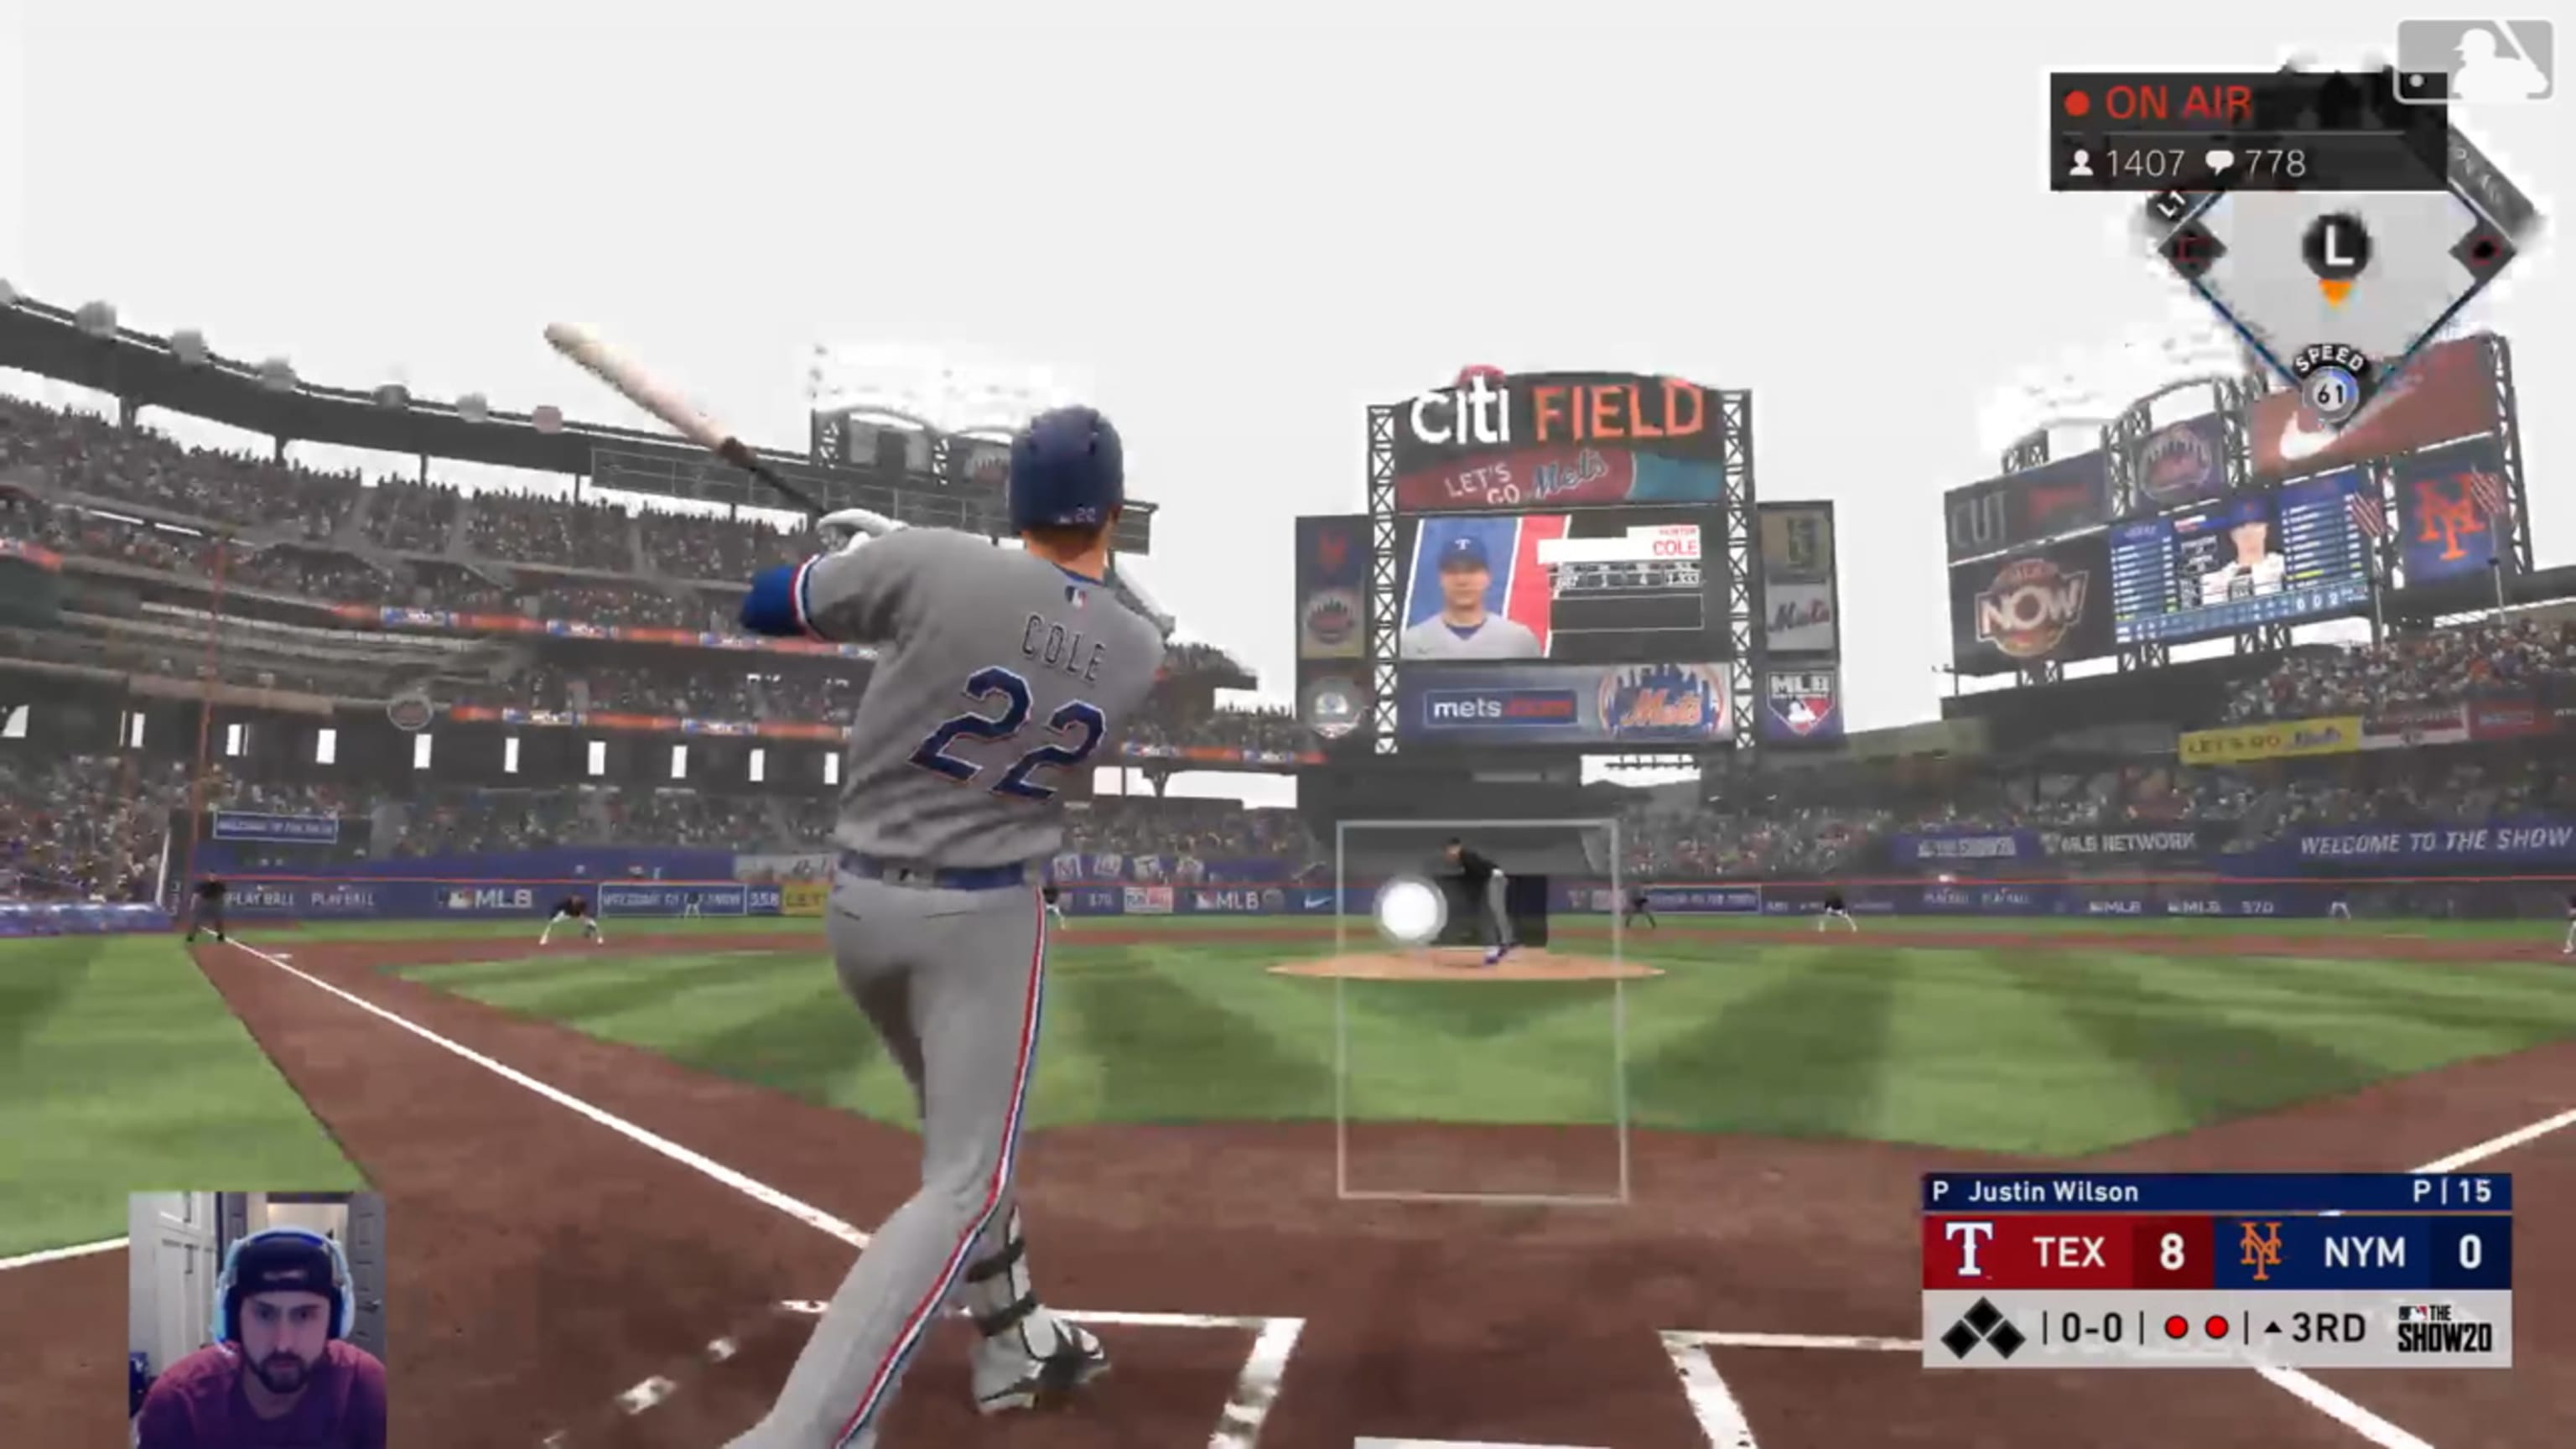 How to watch Rhys Hoskins via Twitch stream in MLB The Show 20